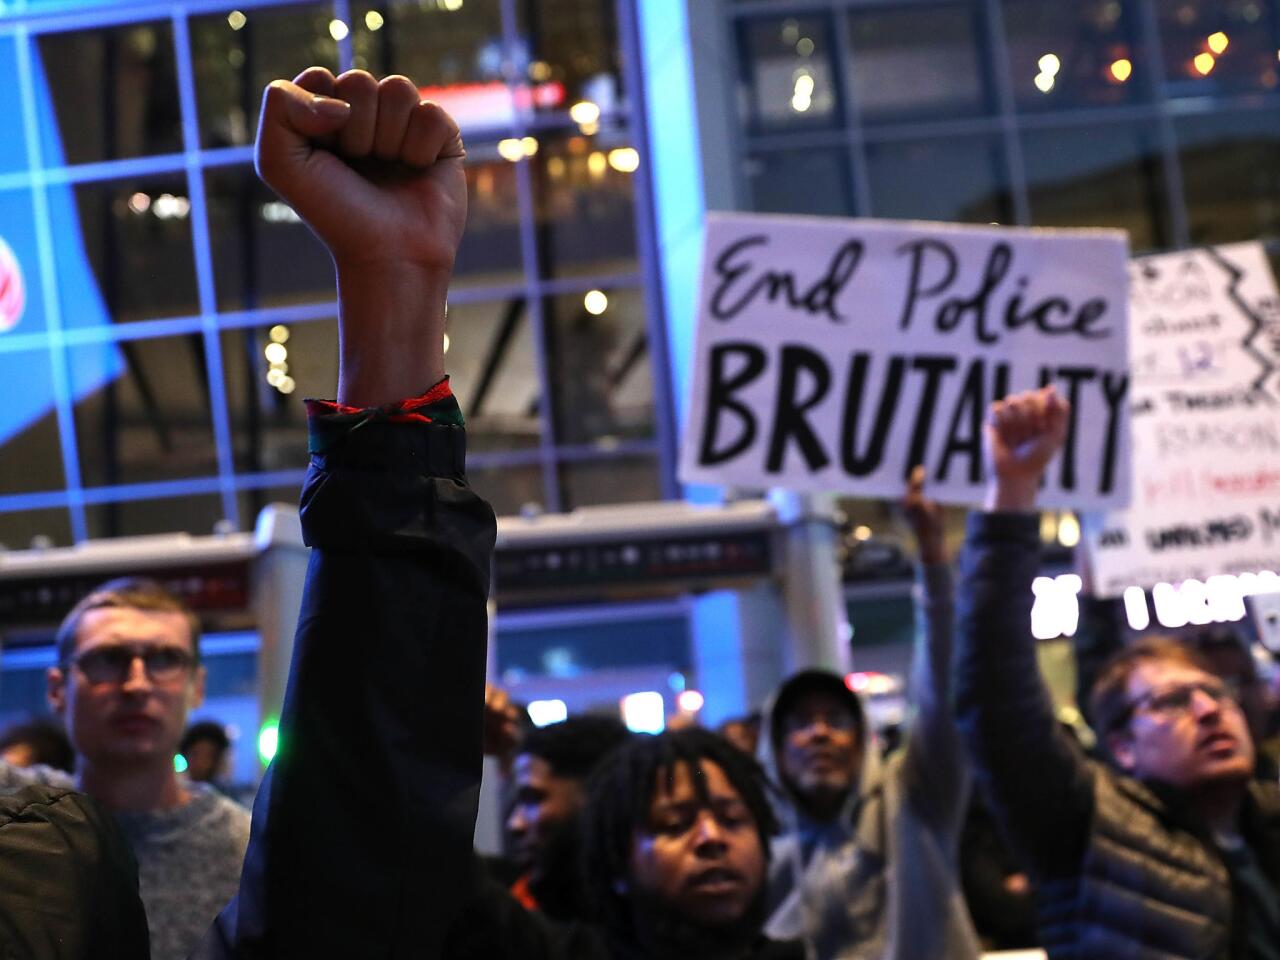 Black Lives Matter protesters hold their fists in the air as they block the entrance to the Golden 1 Center arena during a demonstration in Sacramento.